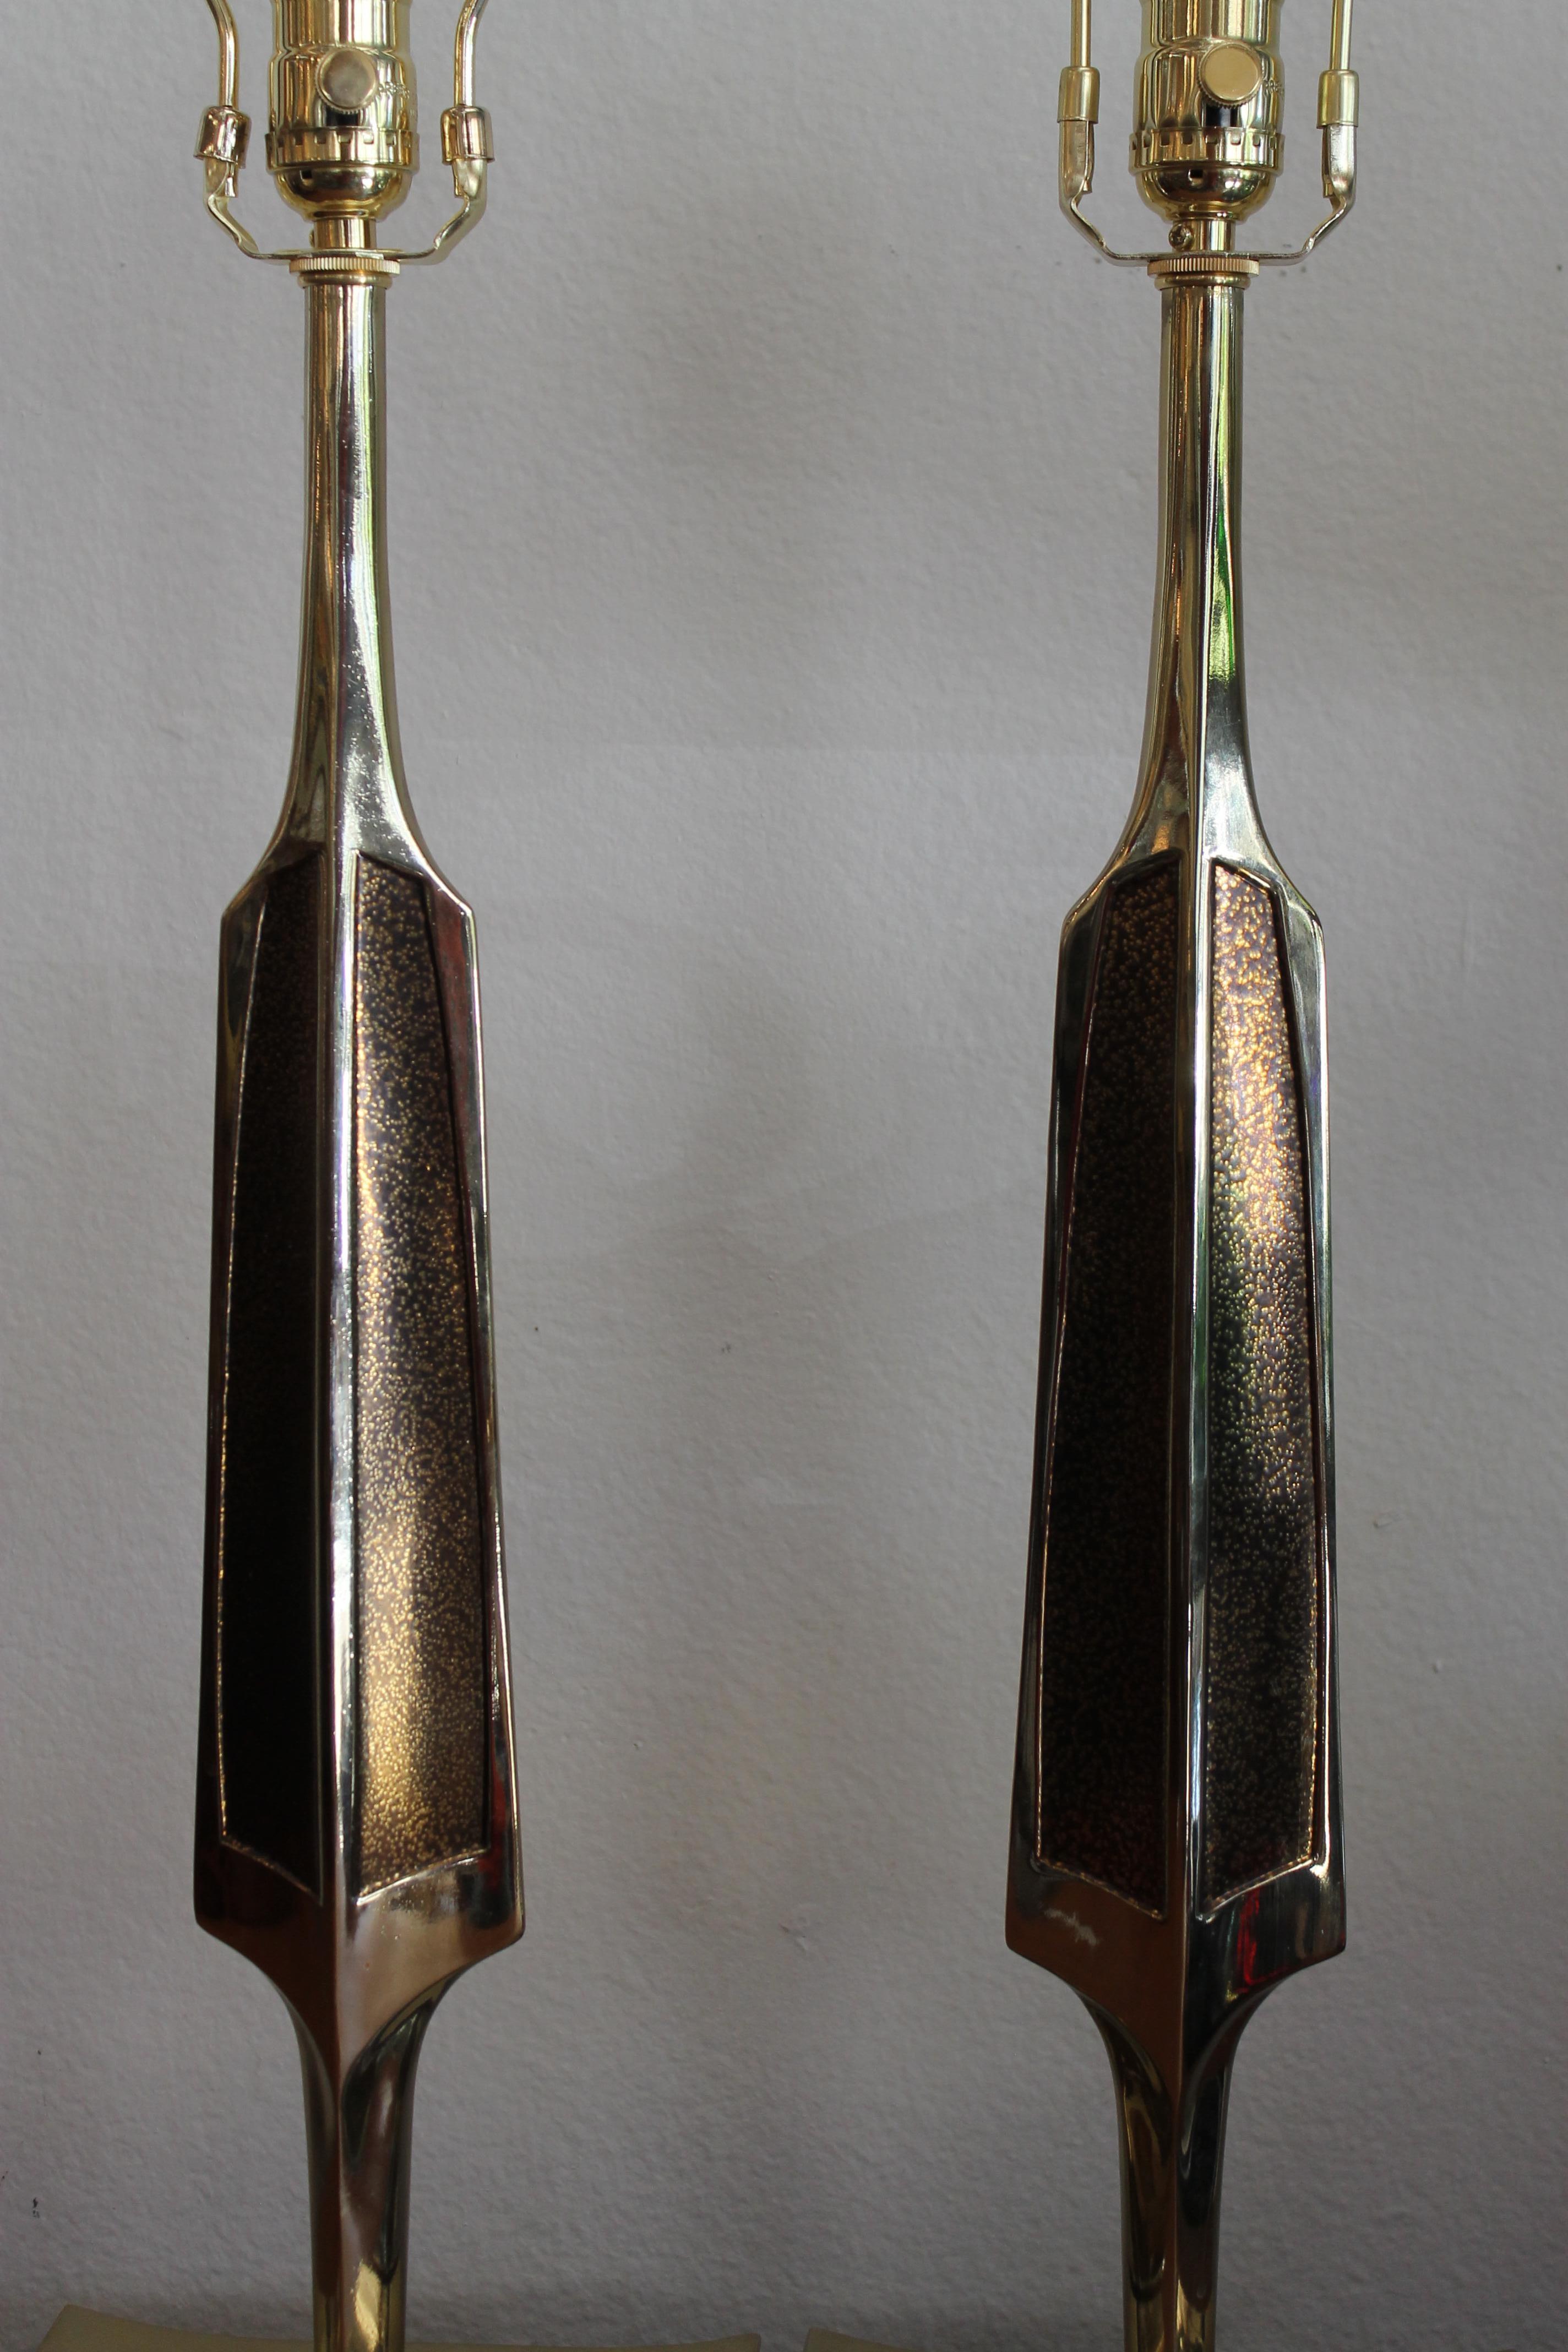 Mid-20th Century Pair of Lamps for the Laurel Lamp Co.